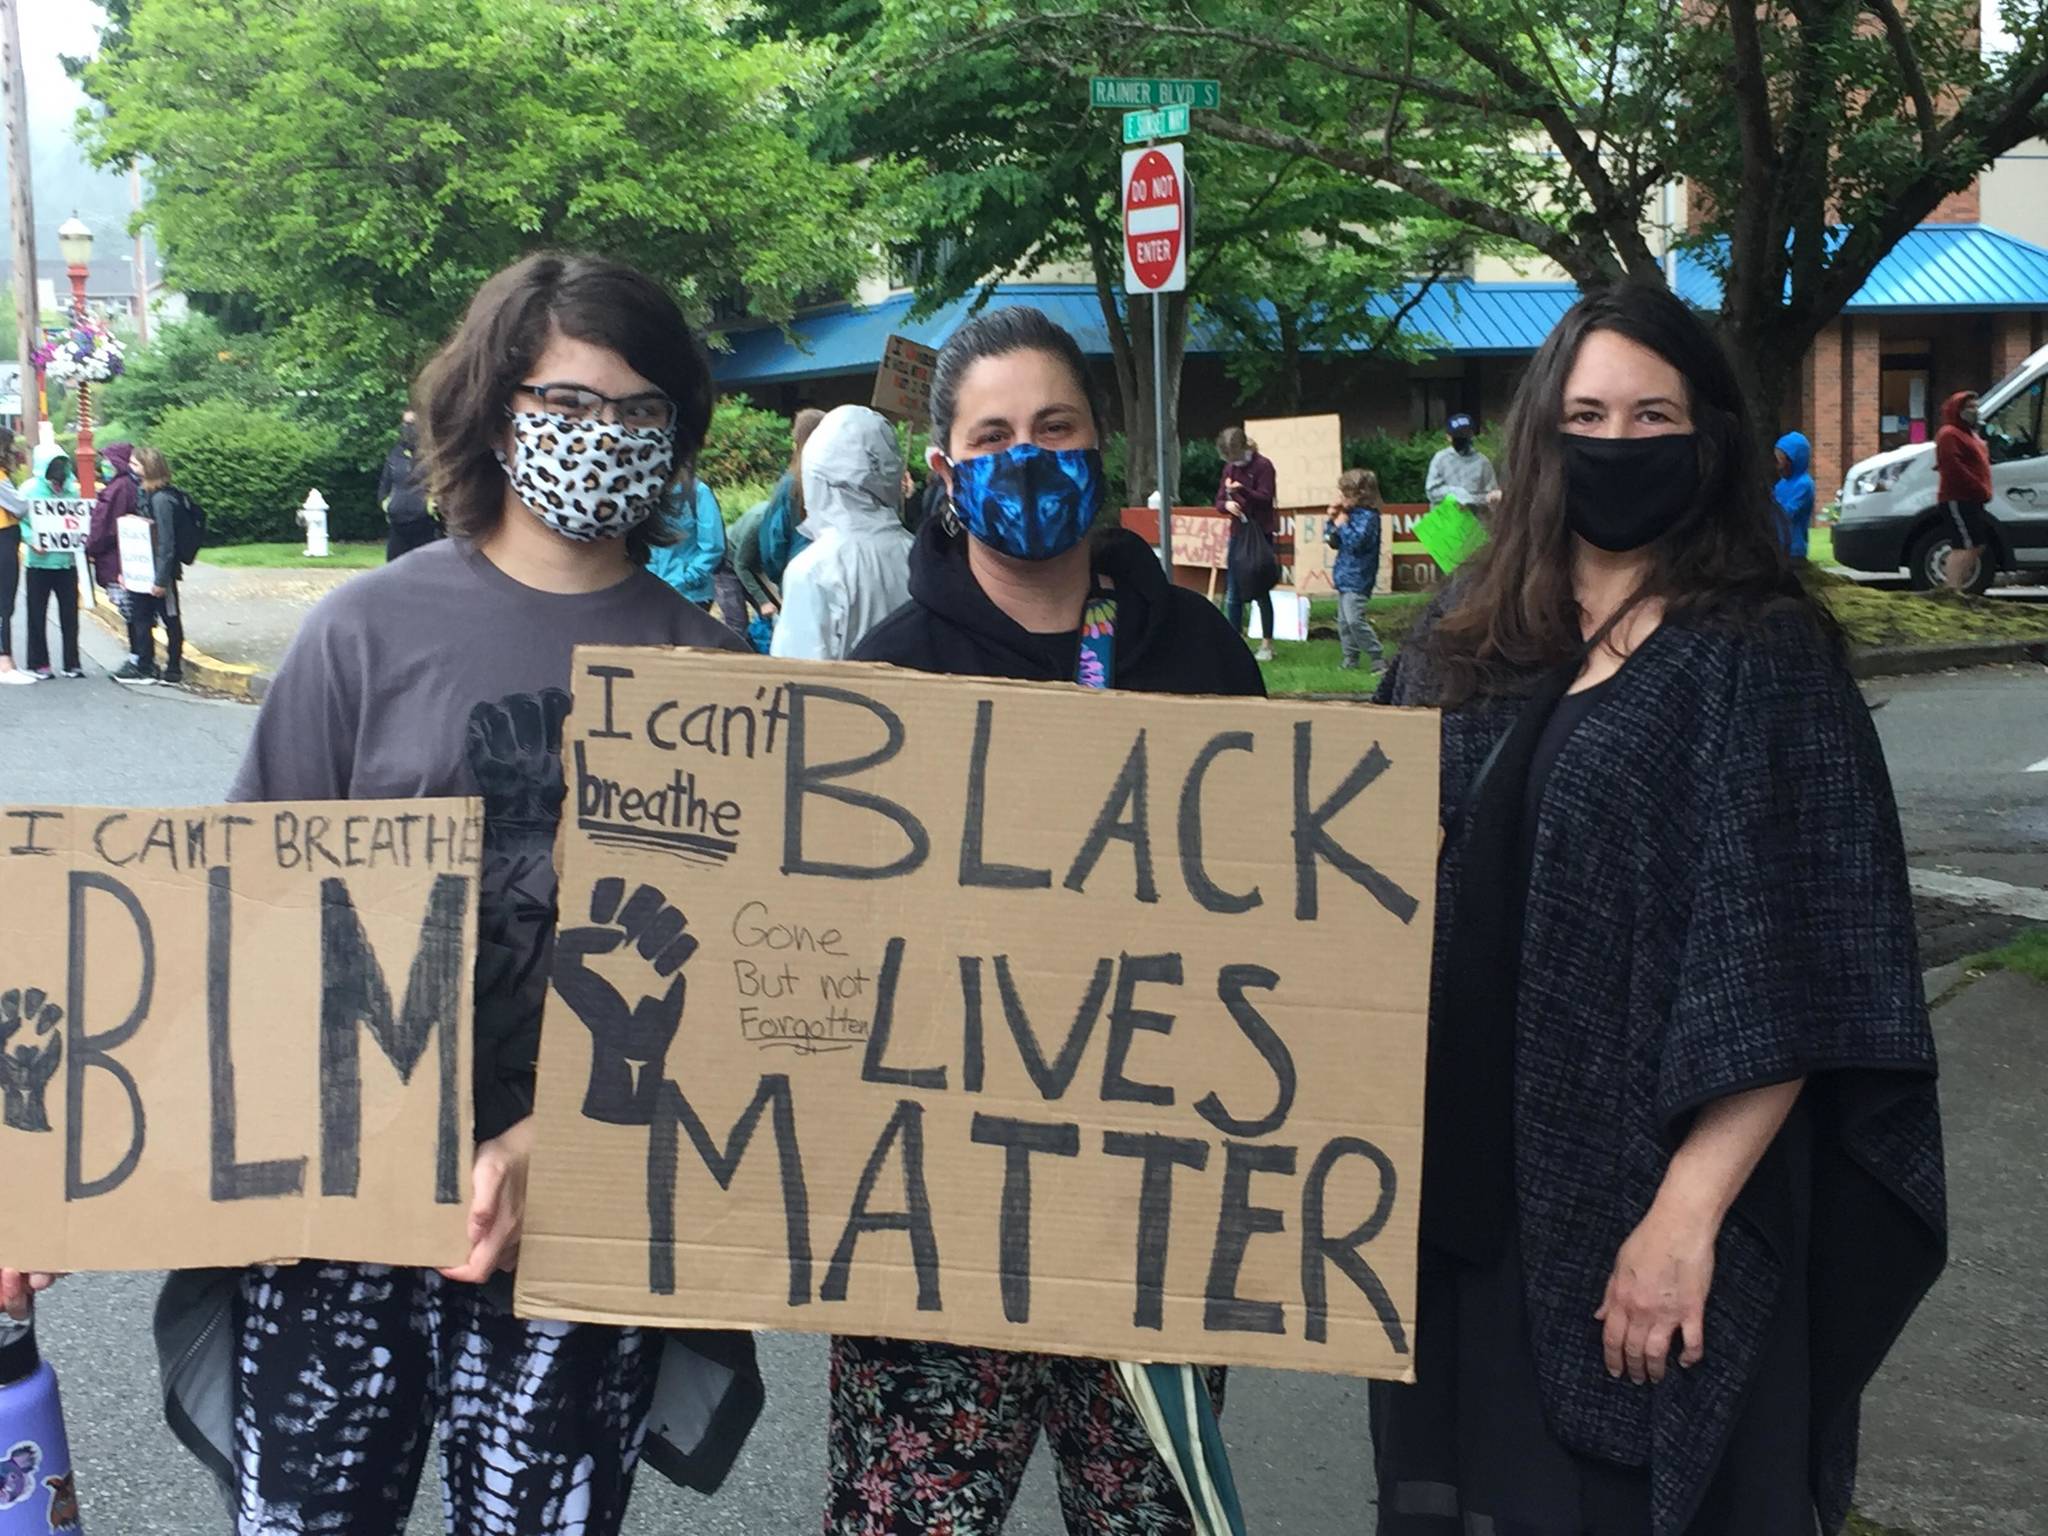 From the Issaquah Black Lives Matter demonstration, Friday, June 12. Photo by William Shaw